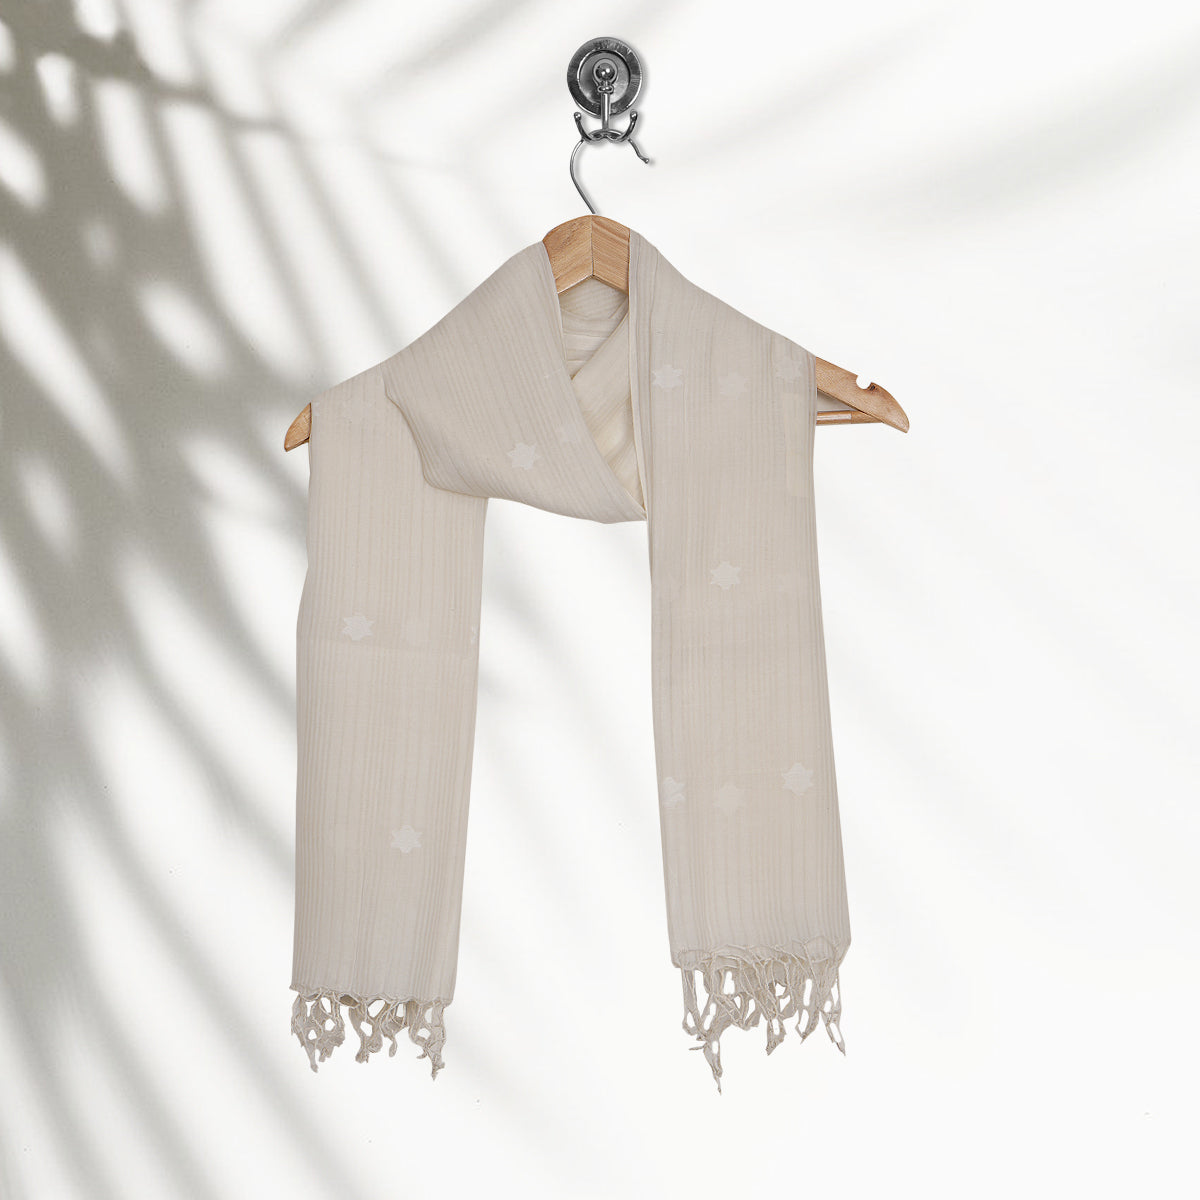 Off White Color Handwoven Jamdani Cotton Stole With Tassels